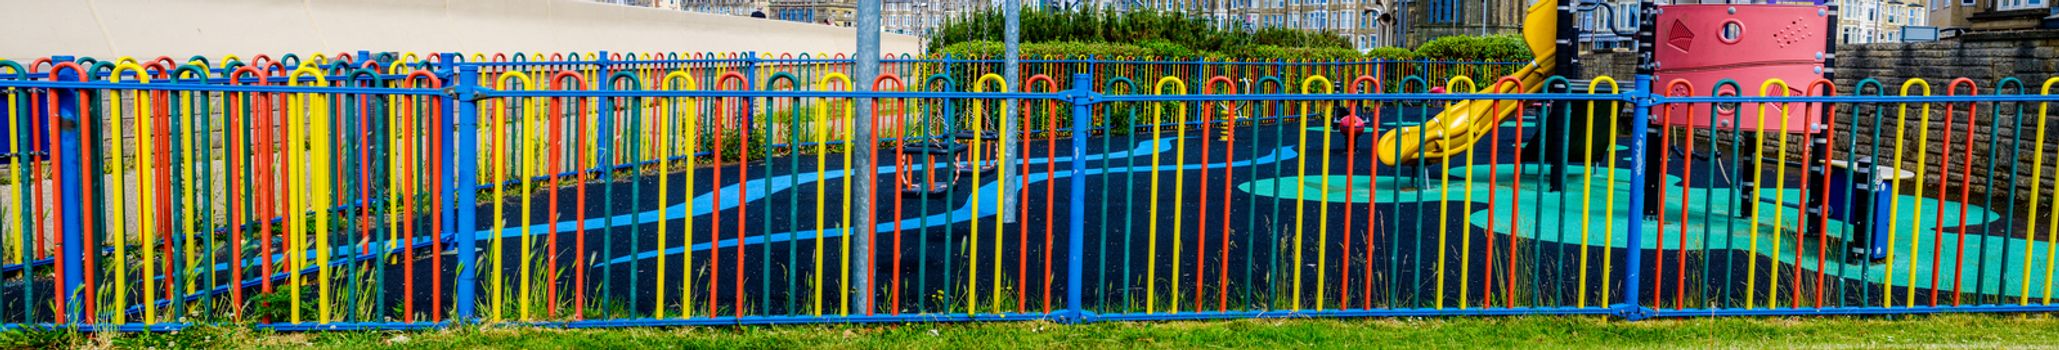 Colorful garden fence with playground int the background